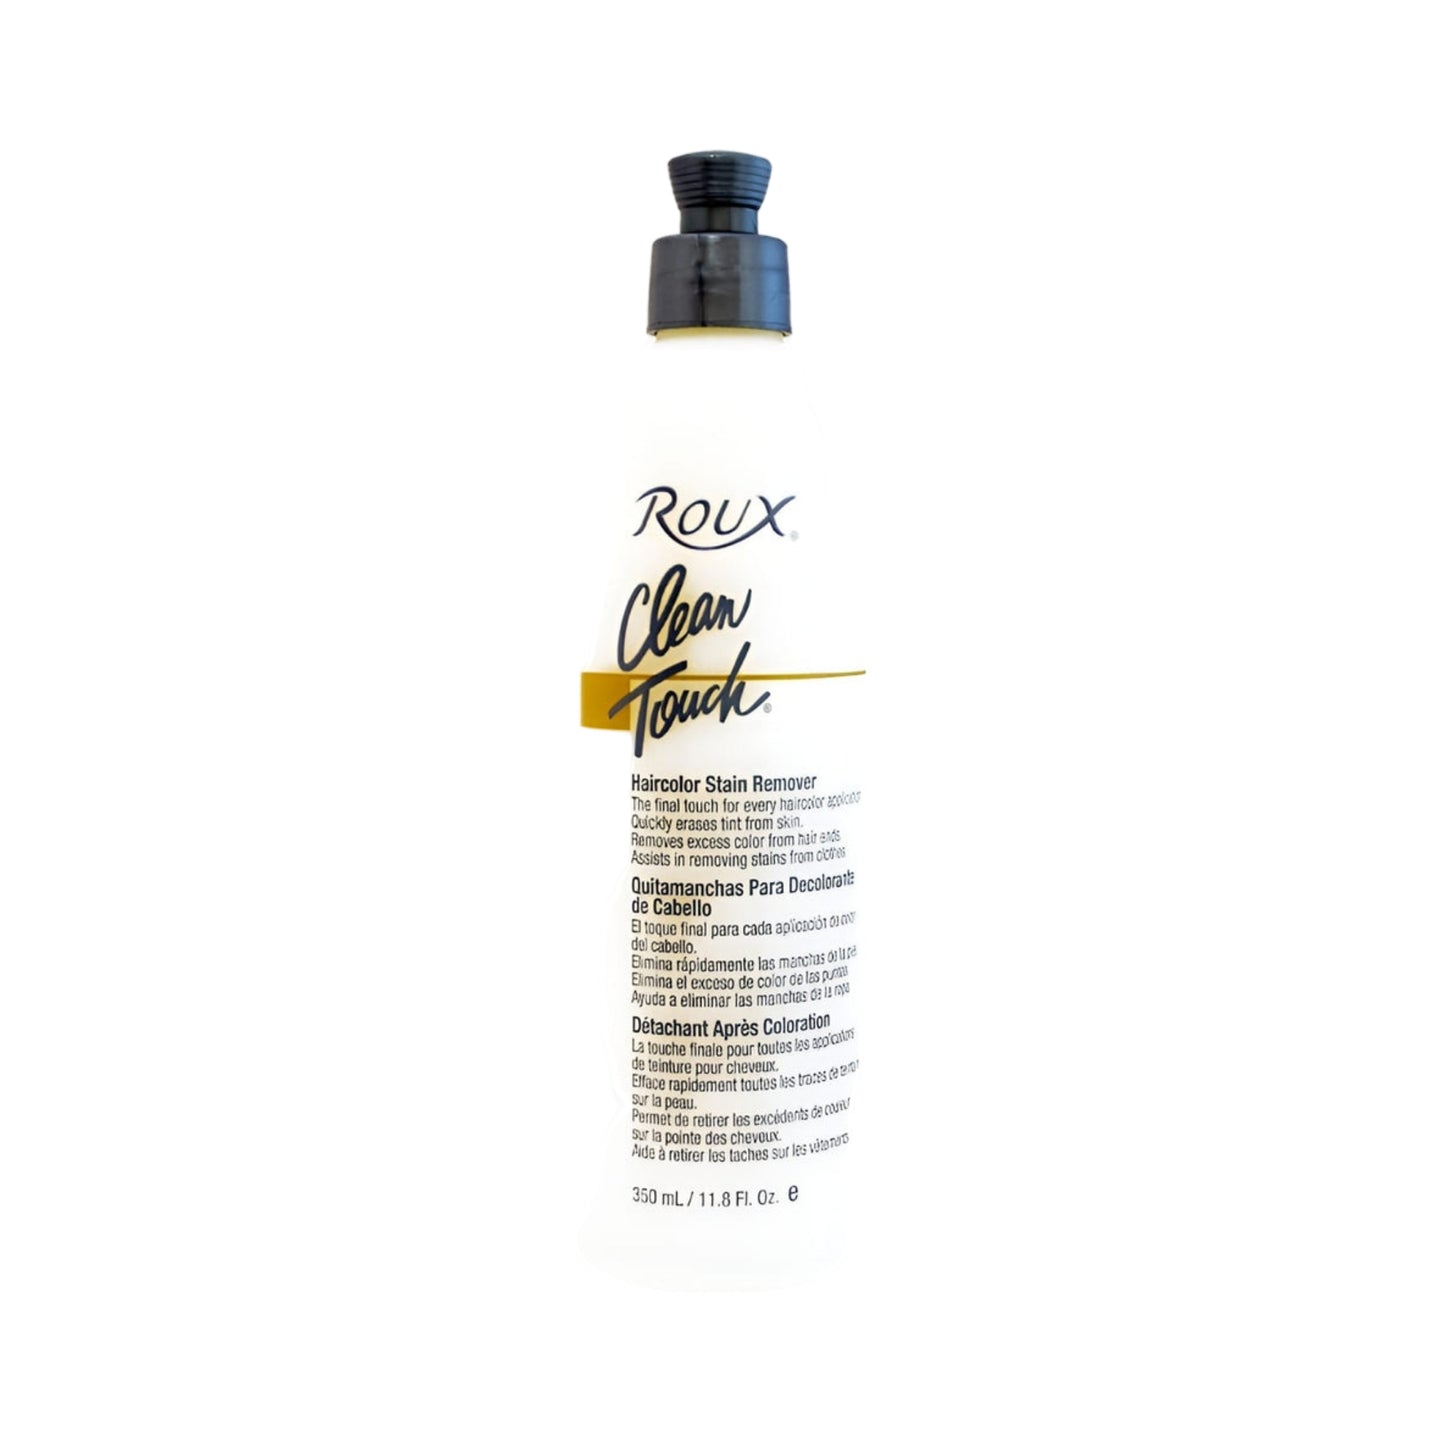 ROUX CLEAN TOUCH  Haircolor Stain Remover 11.8 oz